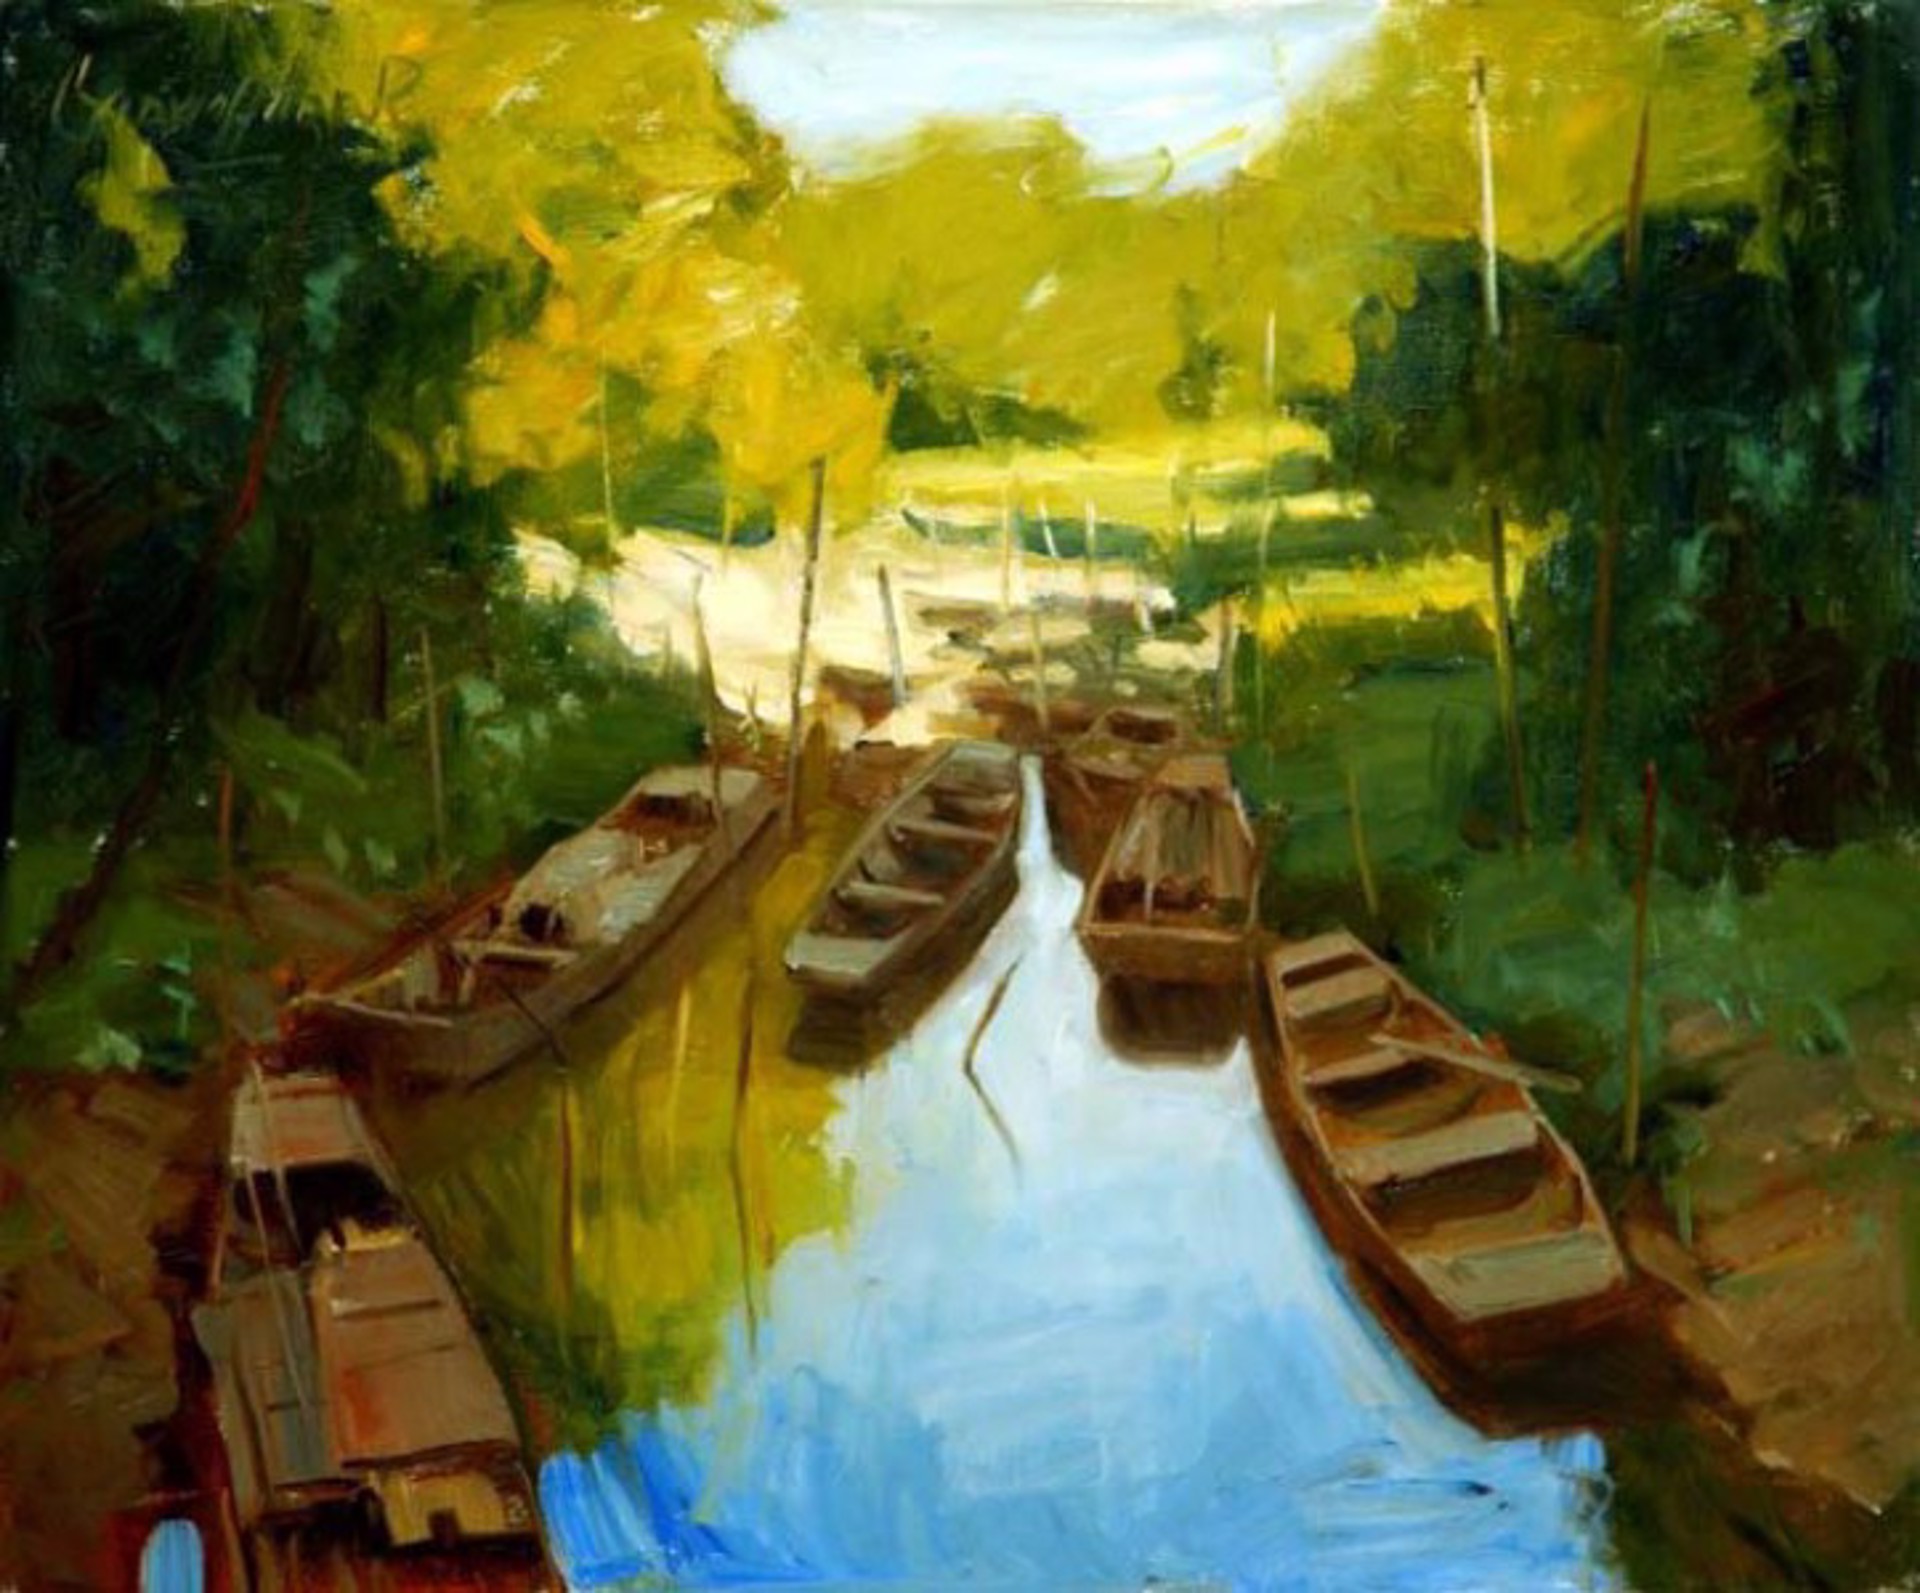 A Gathering of Boats by Ken Cadwallader